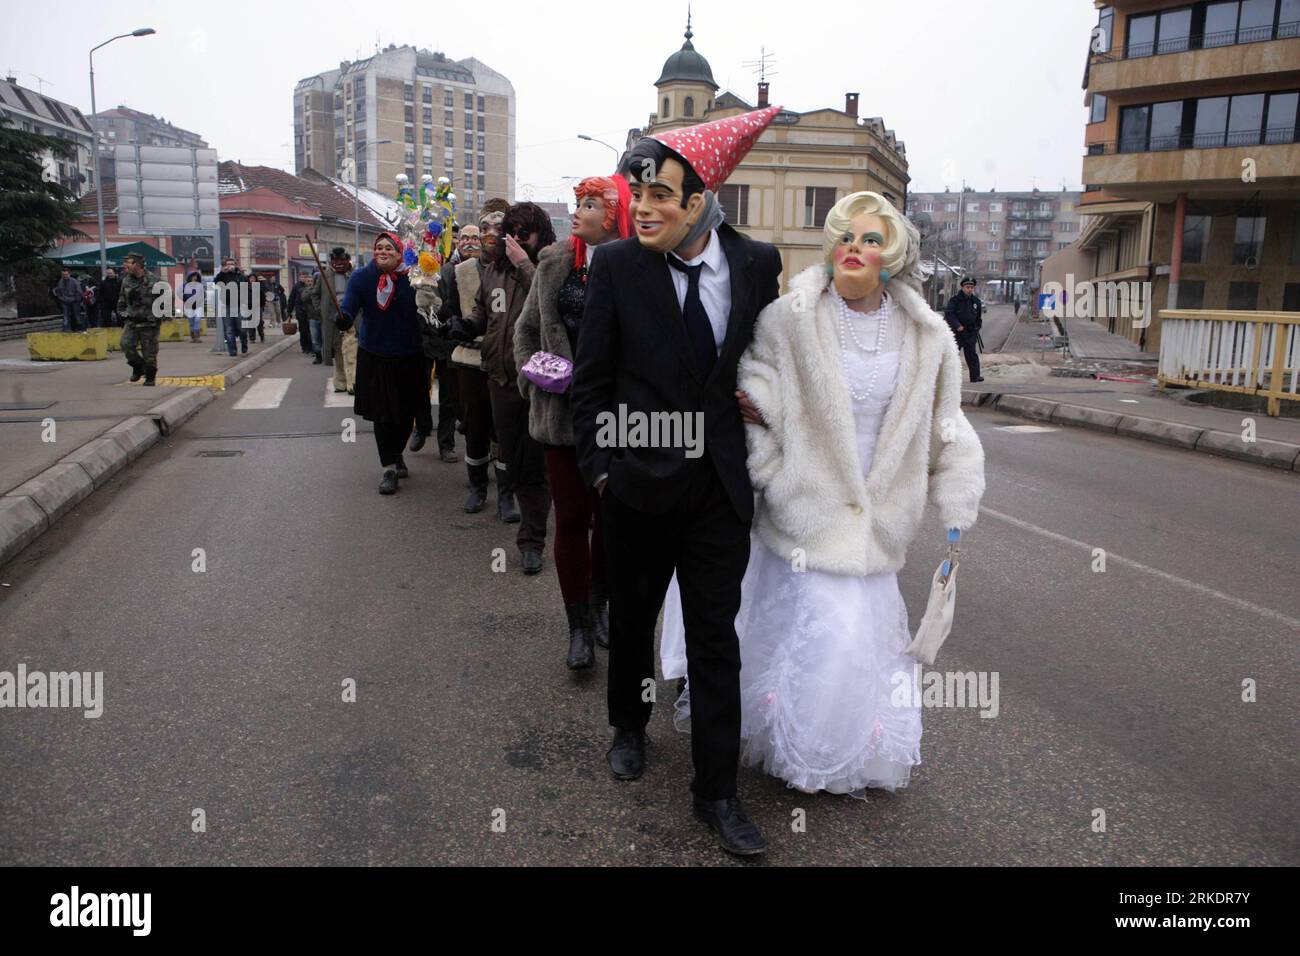 Bildnummer: 54988370  Datum: 06.03.2011  Copyright: imago/Xinhua (110306) -- GLAVICA, March 6, 2011 (Xinhua) -- A Newlyweds in masks from village Glavica go to church in nearby town Paracin, during a marriage parade, 200 km southeast of Belgrade, Serbia, March 6, 2011. This is a part of Serbian traditional manifestation from the mid 19th century, which is named Komendija , meaning comedy in Serbian rustic language. Across Serbia, gather in villages to celebrate the end of White Week, an old traditional festivity. Various magic acts, ways of dressing, songs and dances of the participants had pu Stock Photo